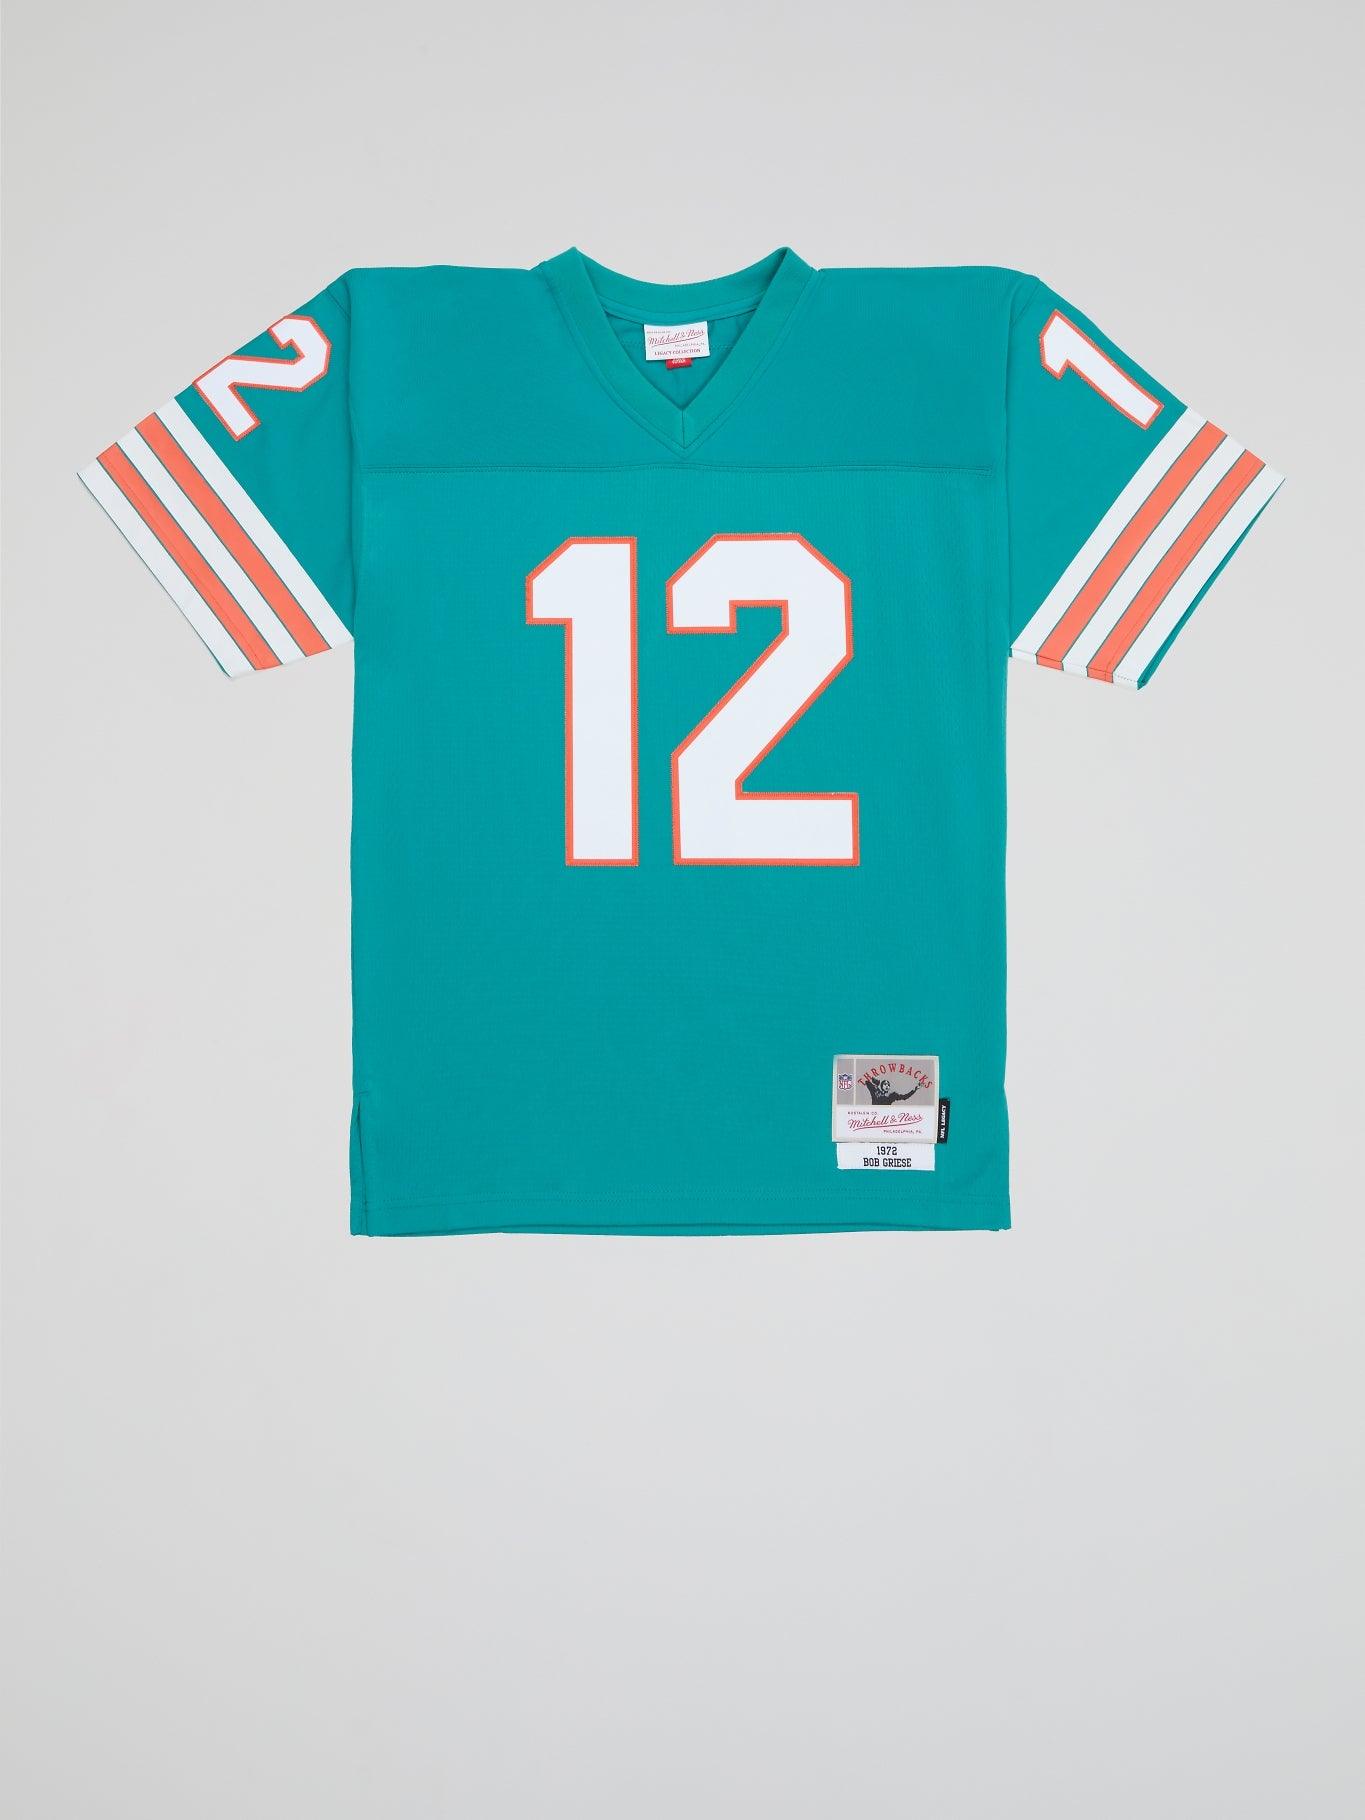 NFL Legacy Jersey Dolphins 1972 Bob Griese - B-Hype Society